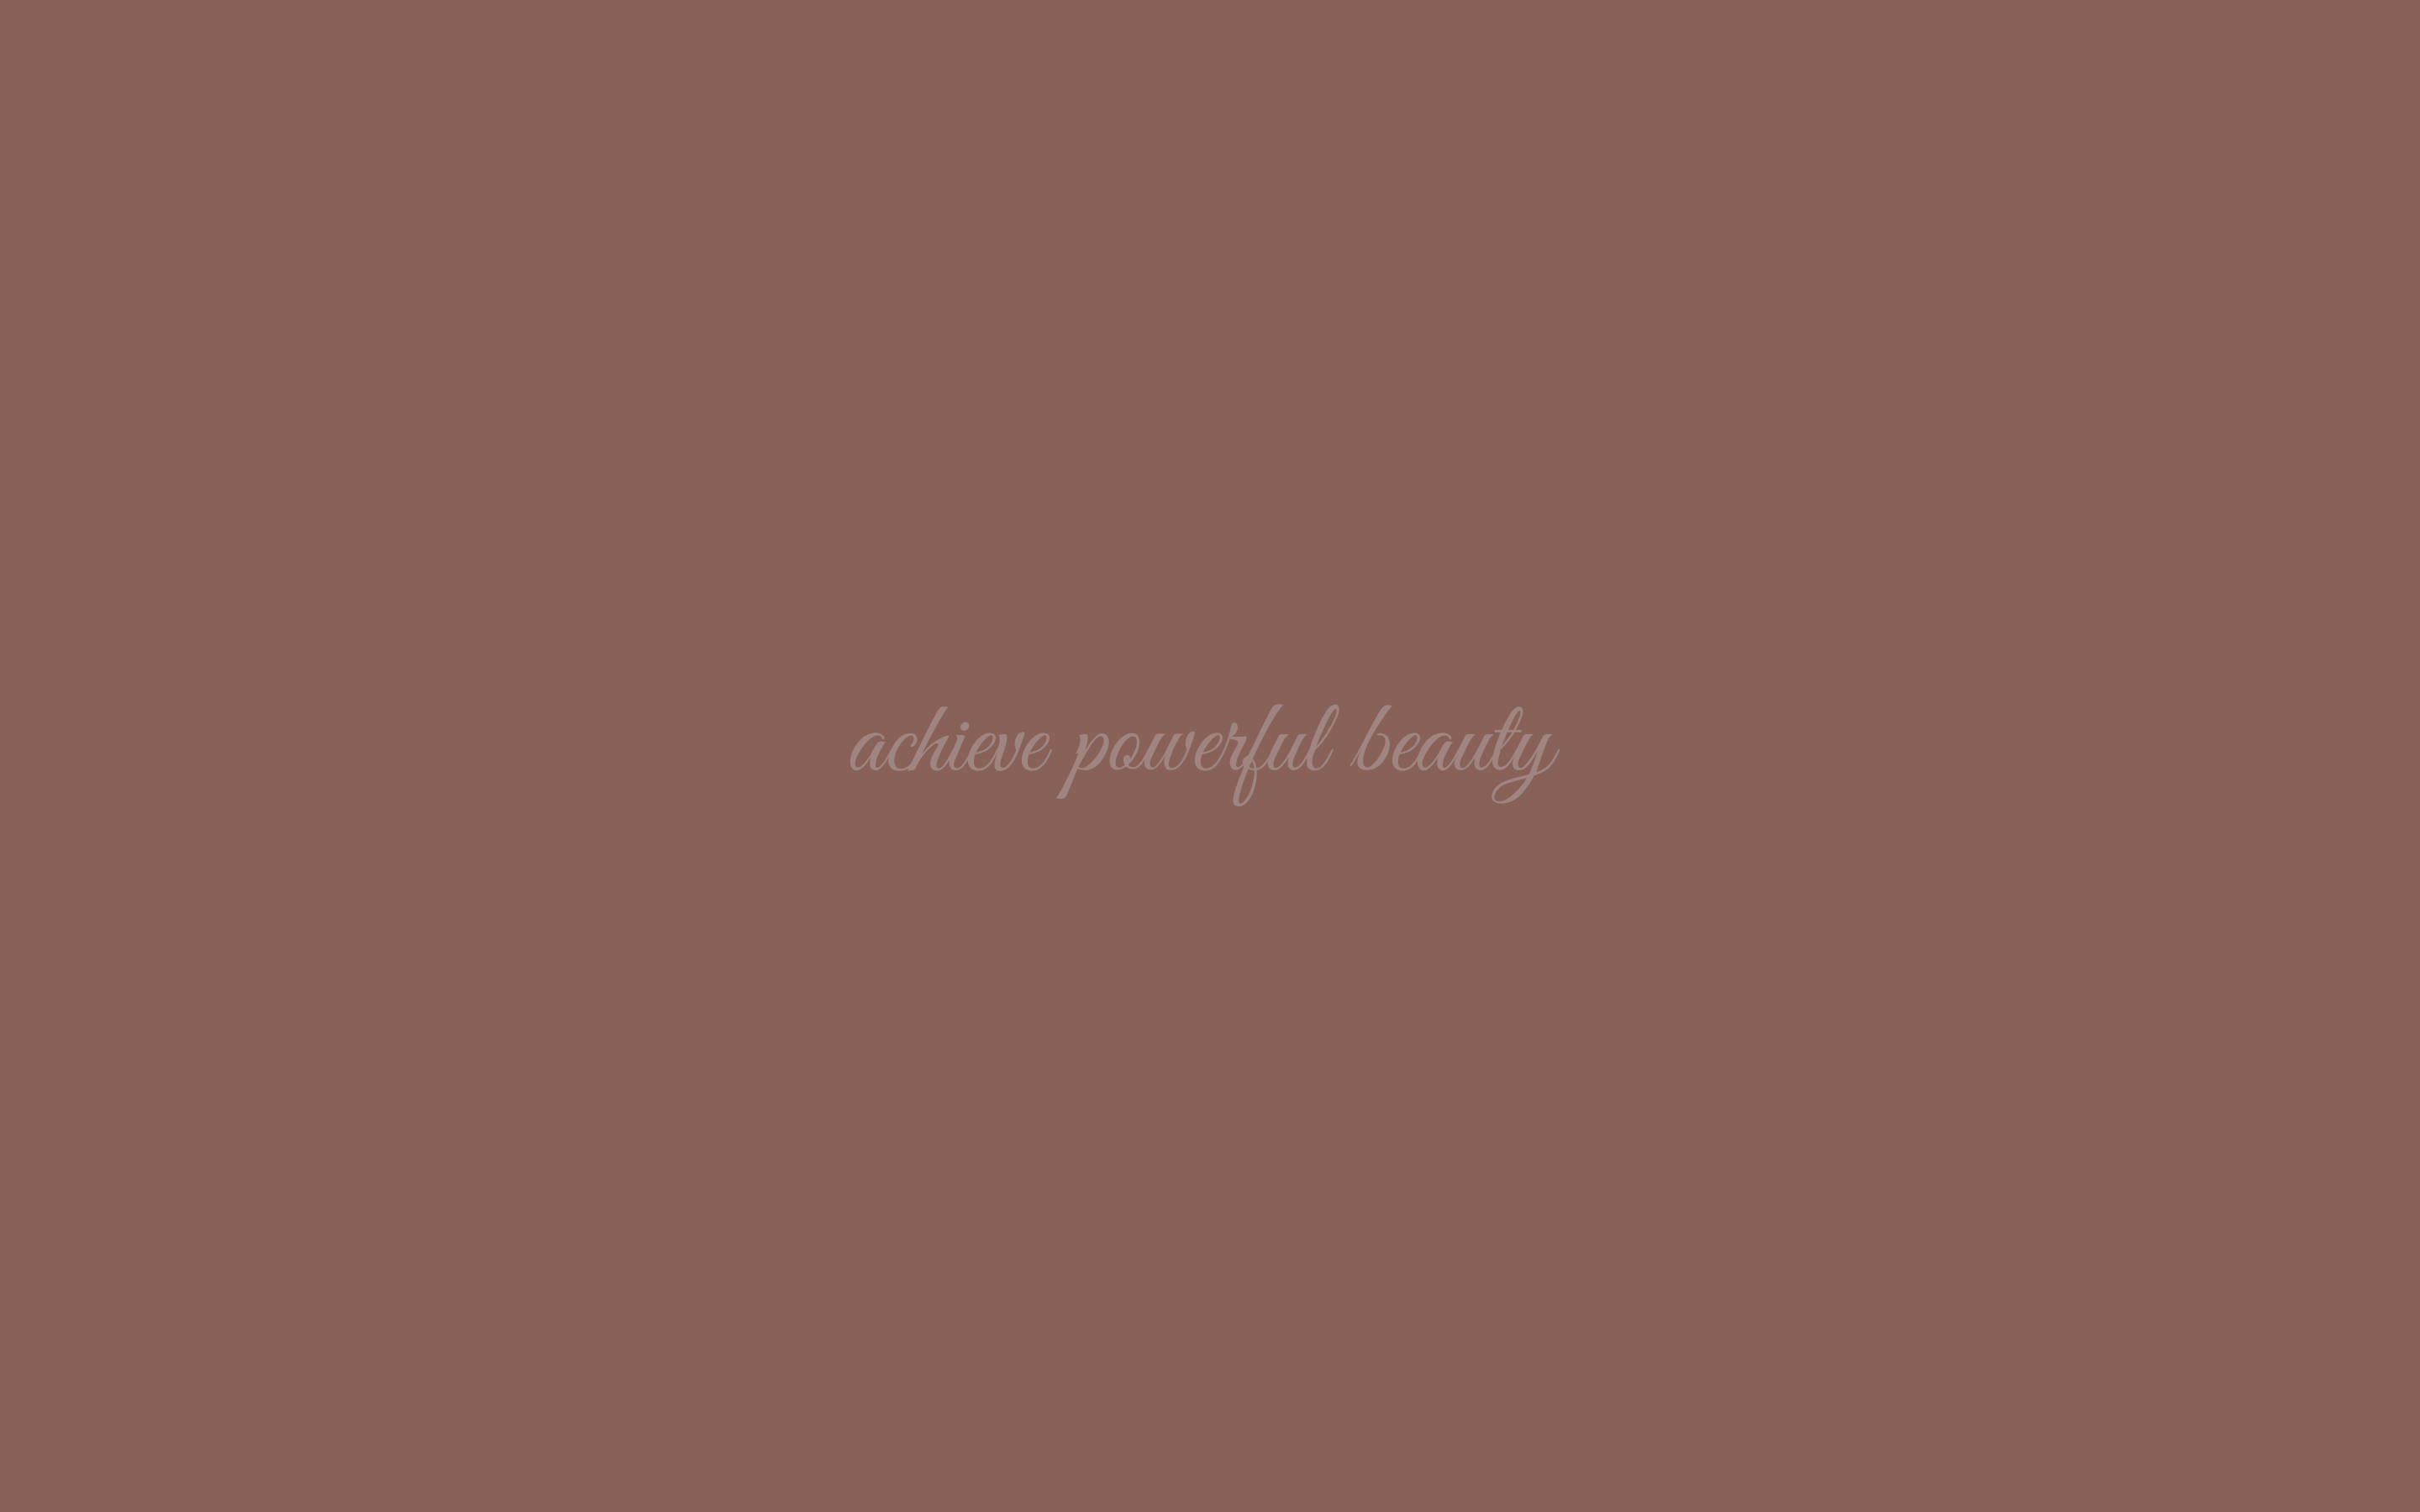 Brown Aesthetic Motivational Quote Laptop Wallpaper